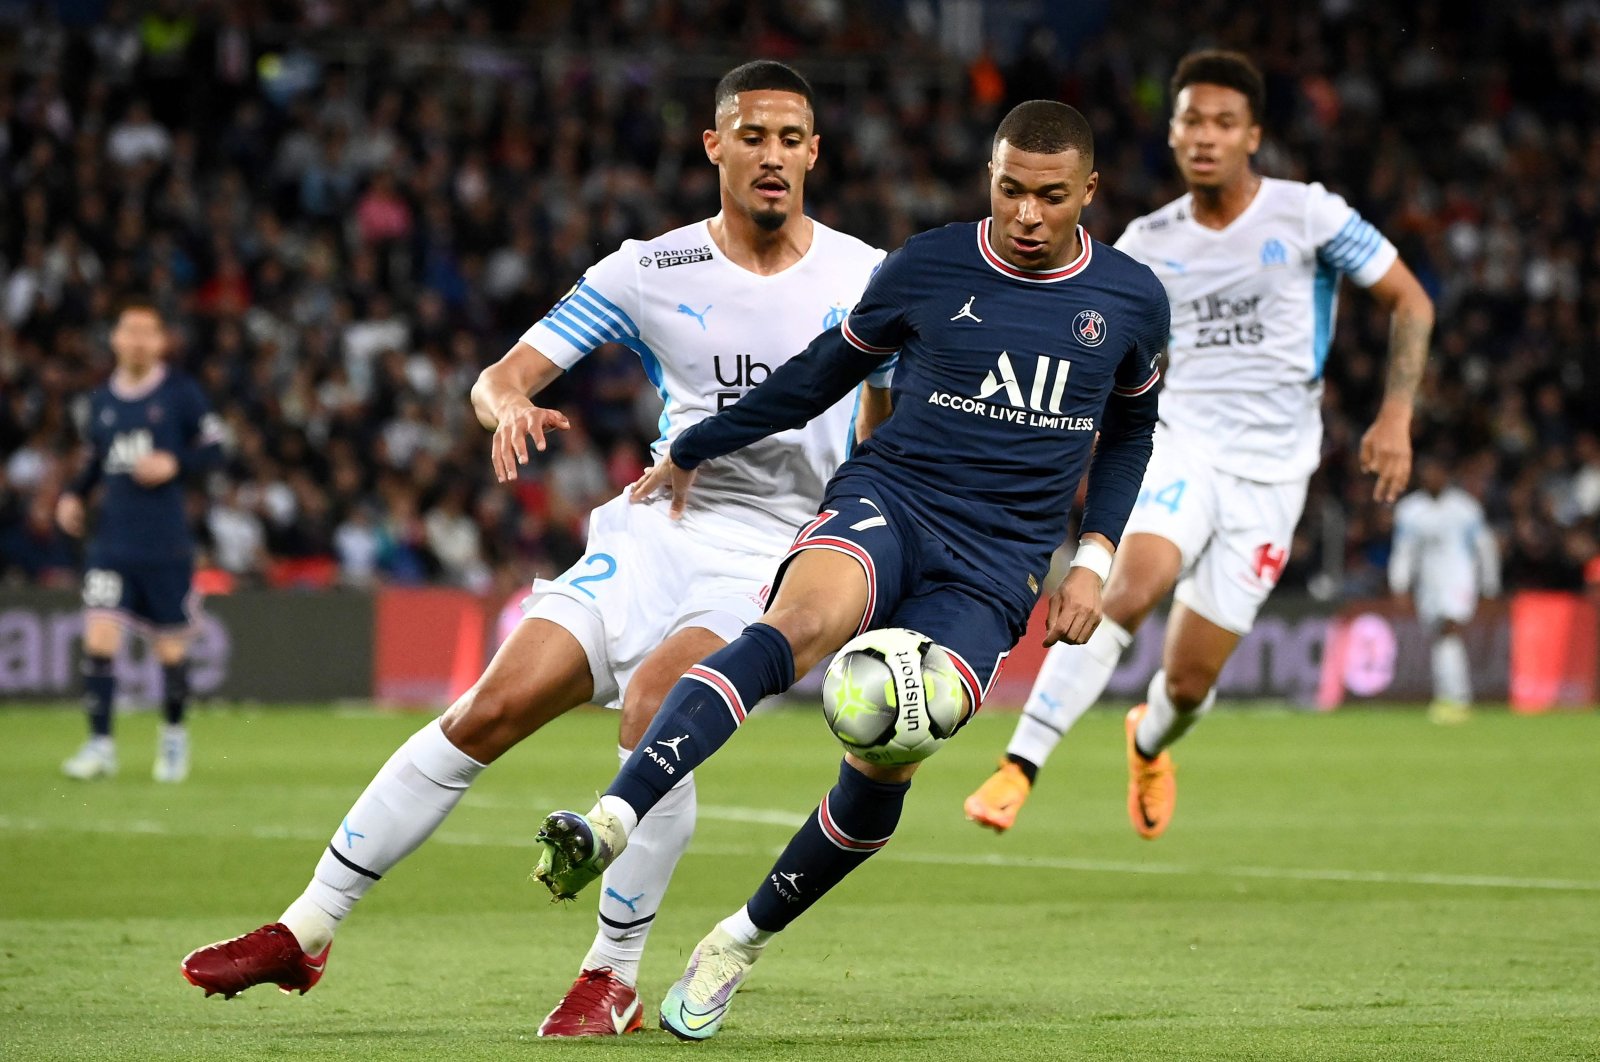 PSG&#039;s Kylian Mbappe (L) controls the ball next to Marseille&#039;s William Saliba in a French L1 match, Paris, France, April 17, 2022. (AFP Photo)